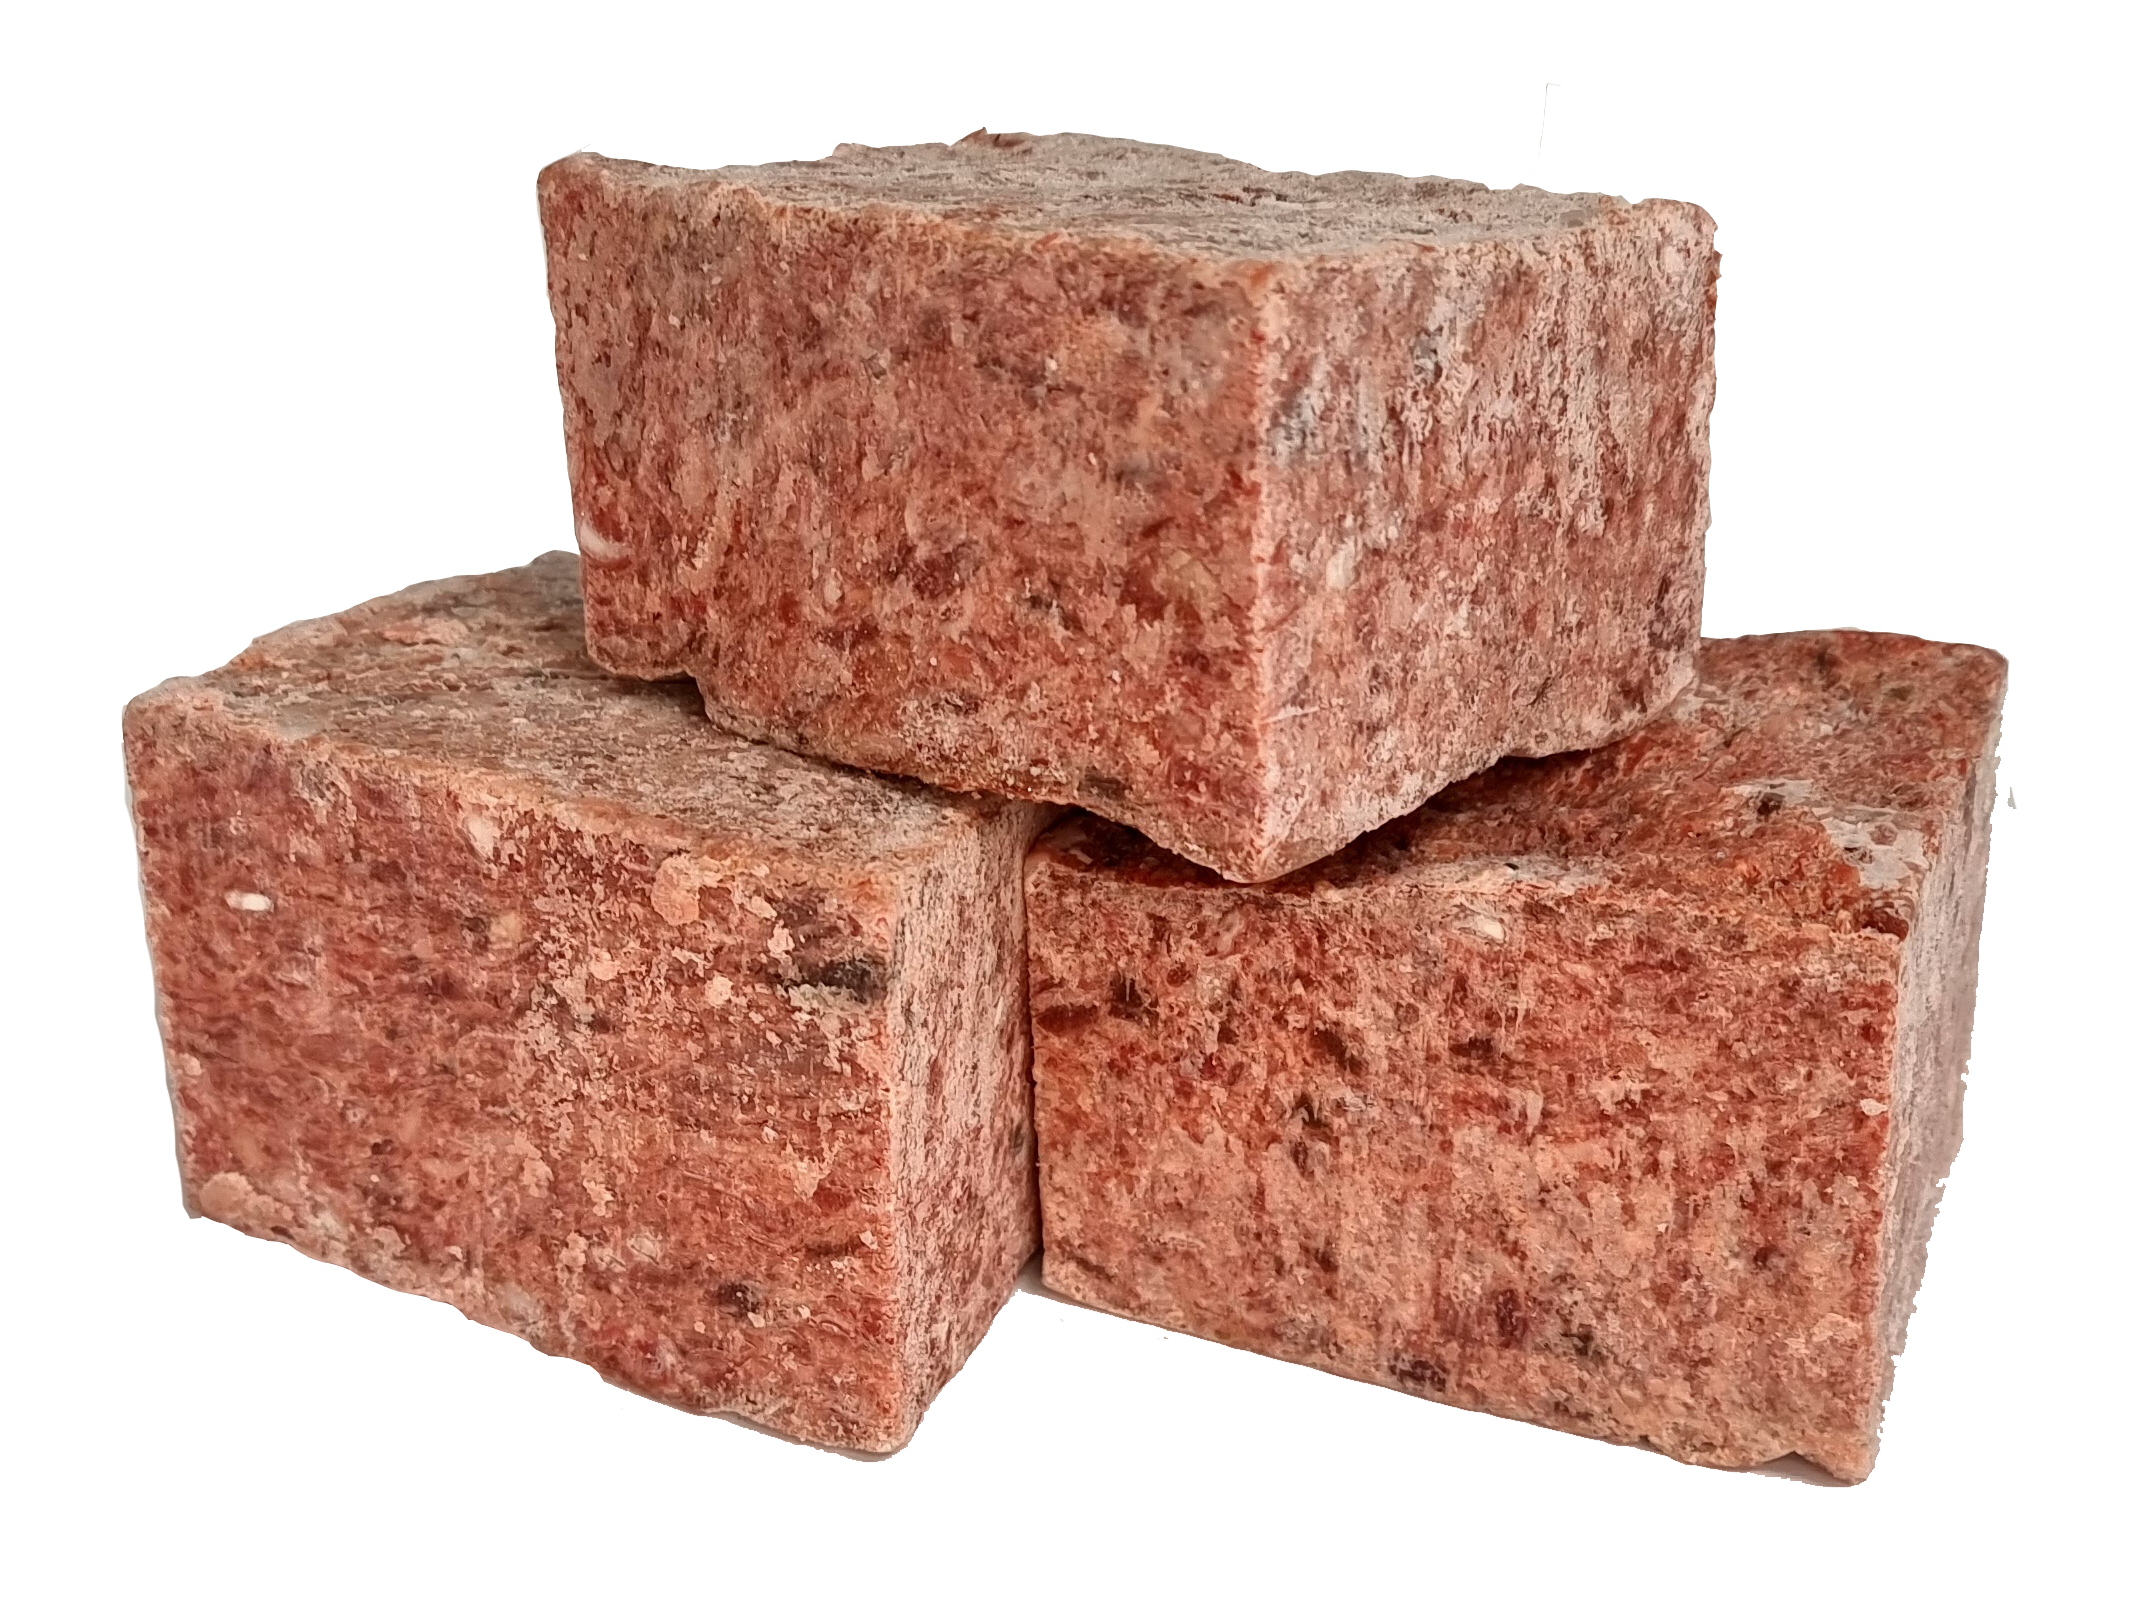 Beef & Chicken COMPLETE 5kgs (11lb) 10 x approx 500g blocks - Working Dog